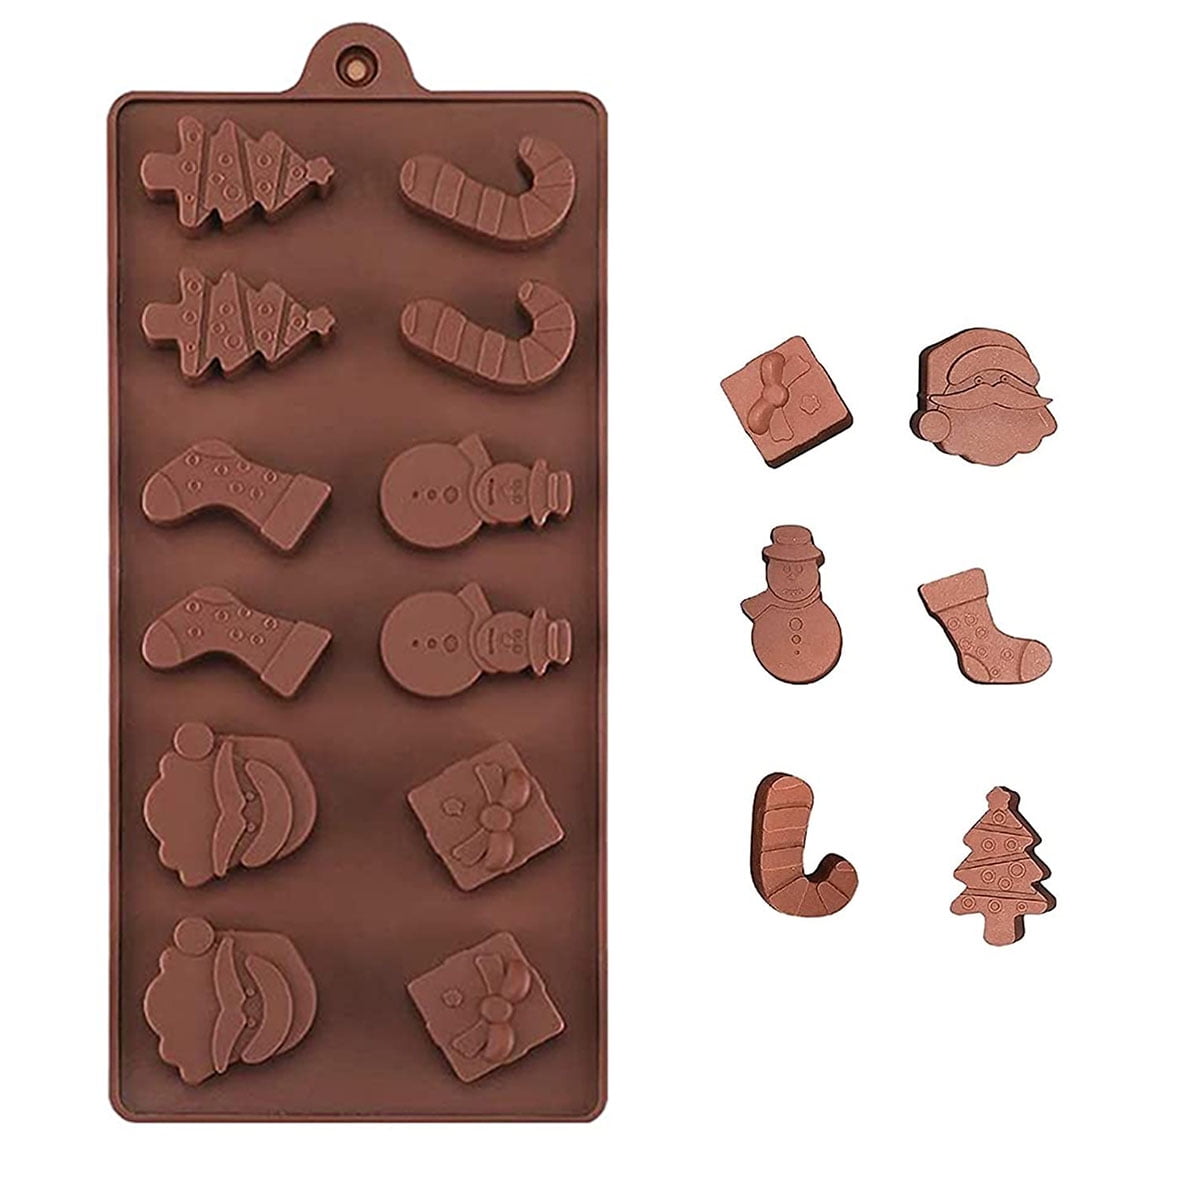 Silicone Cake Mold Sweet Chocolate Cookies Cake Soap Baking for T4C8 